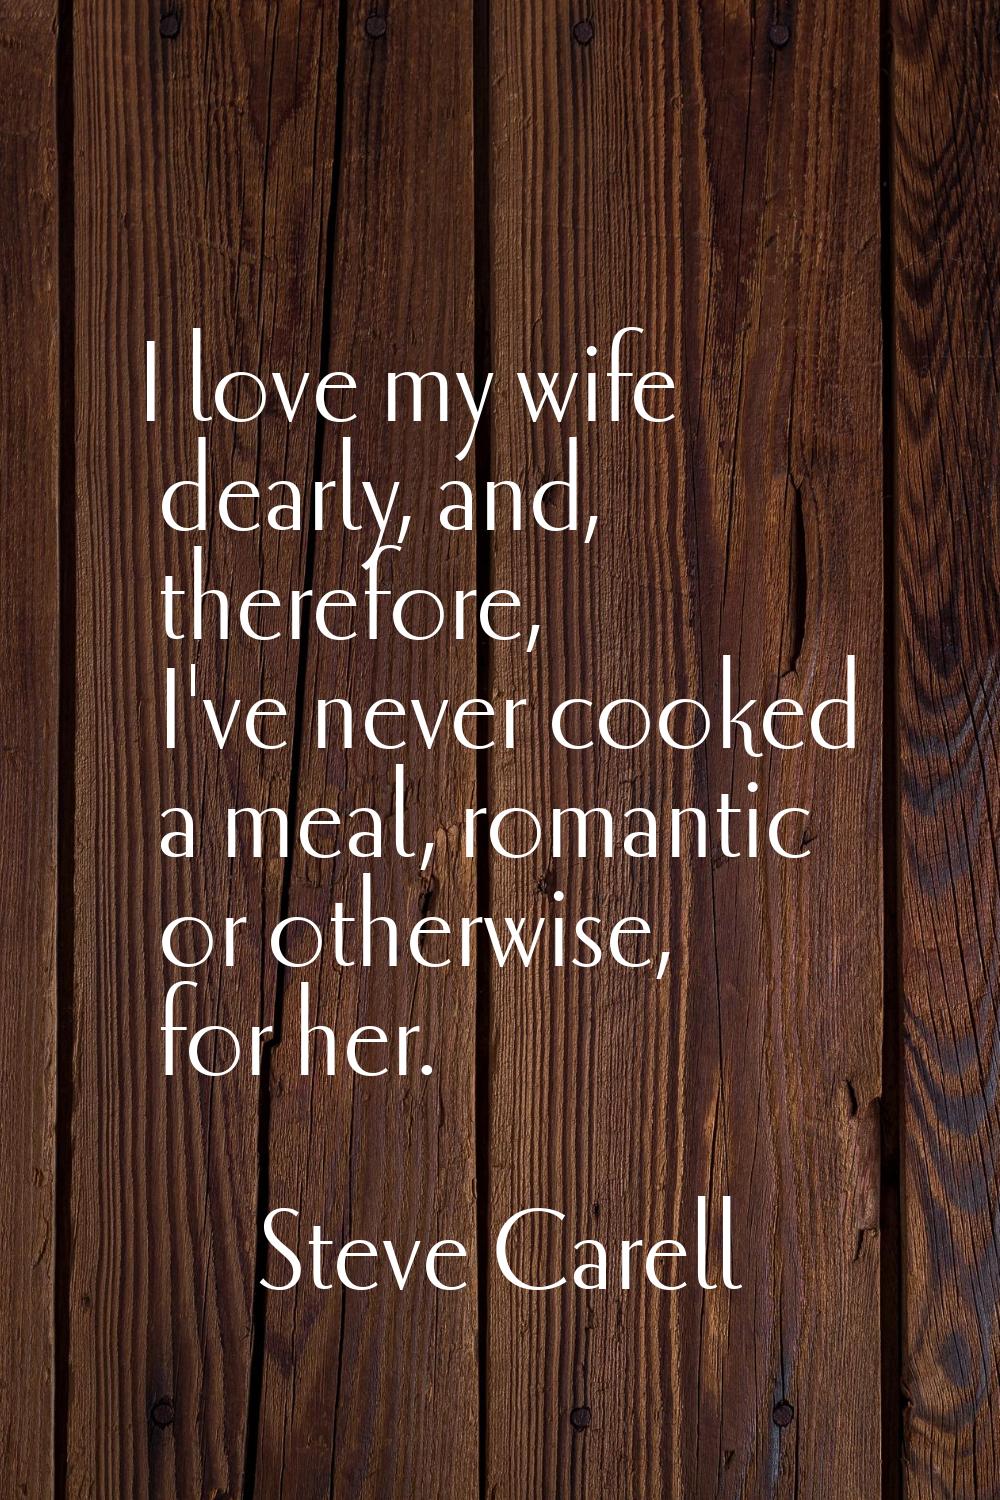 I love my wife dearly, and, therefore, I've never cooked a meal, romantic or otherwise, for her.